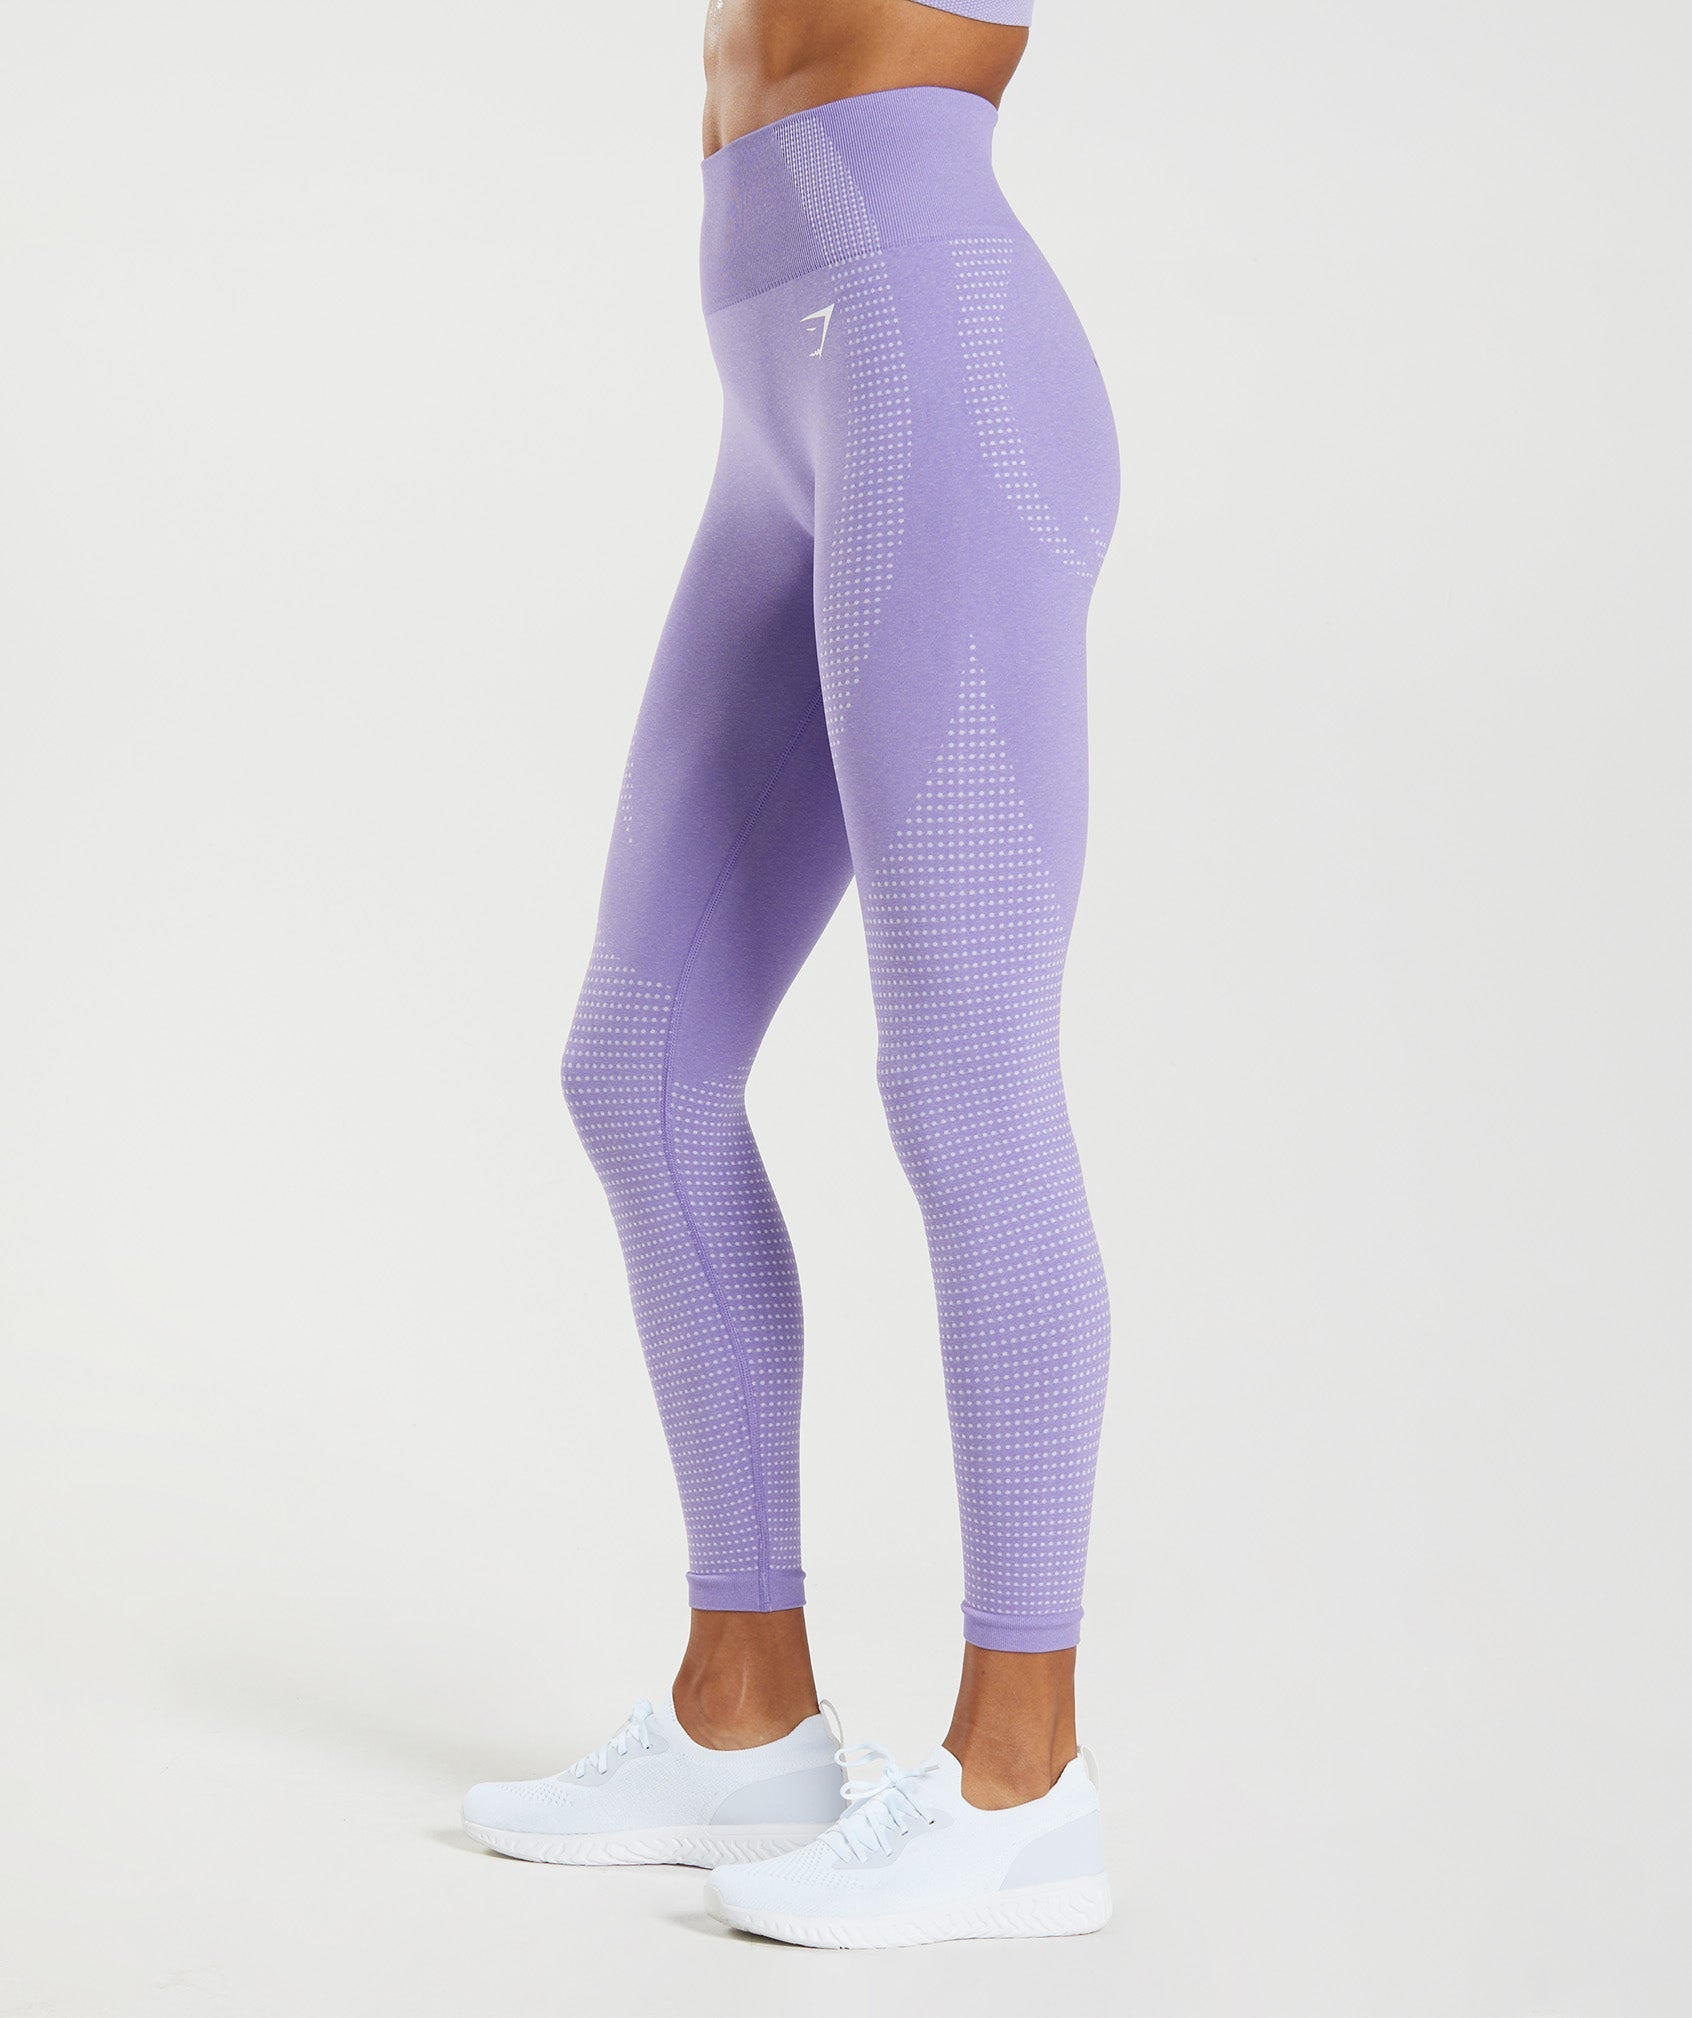 Gymshark, Pants & Jumpsuits, Gymshark Energy Seamless Leggings Dusty  Purple Color Size Xs Extra Small